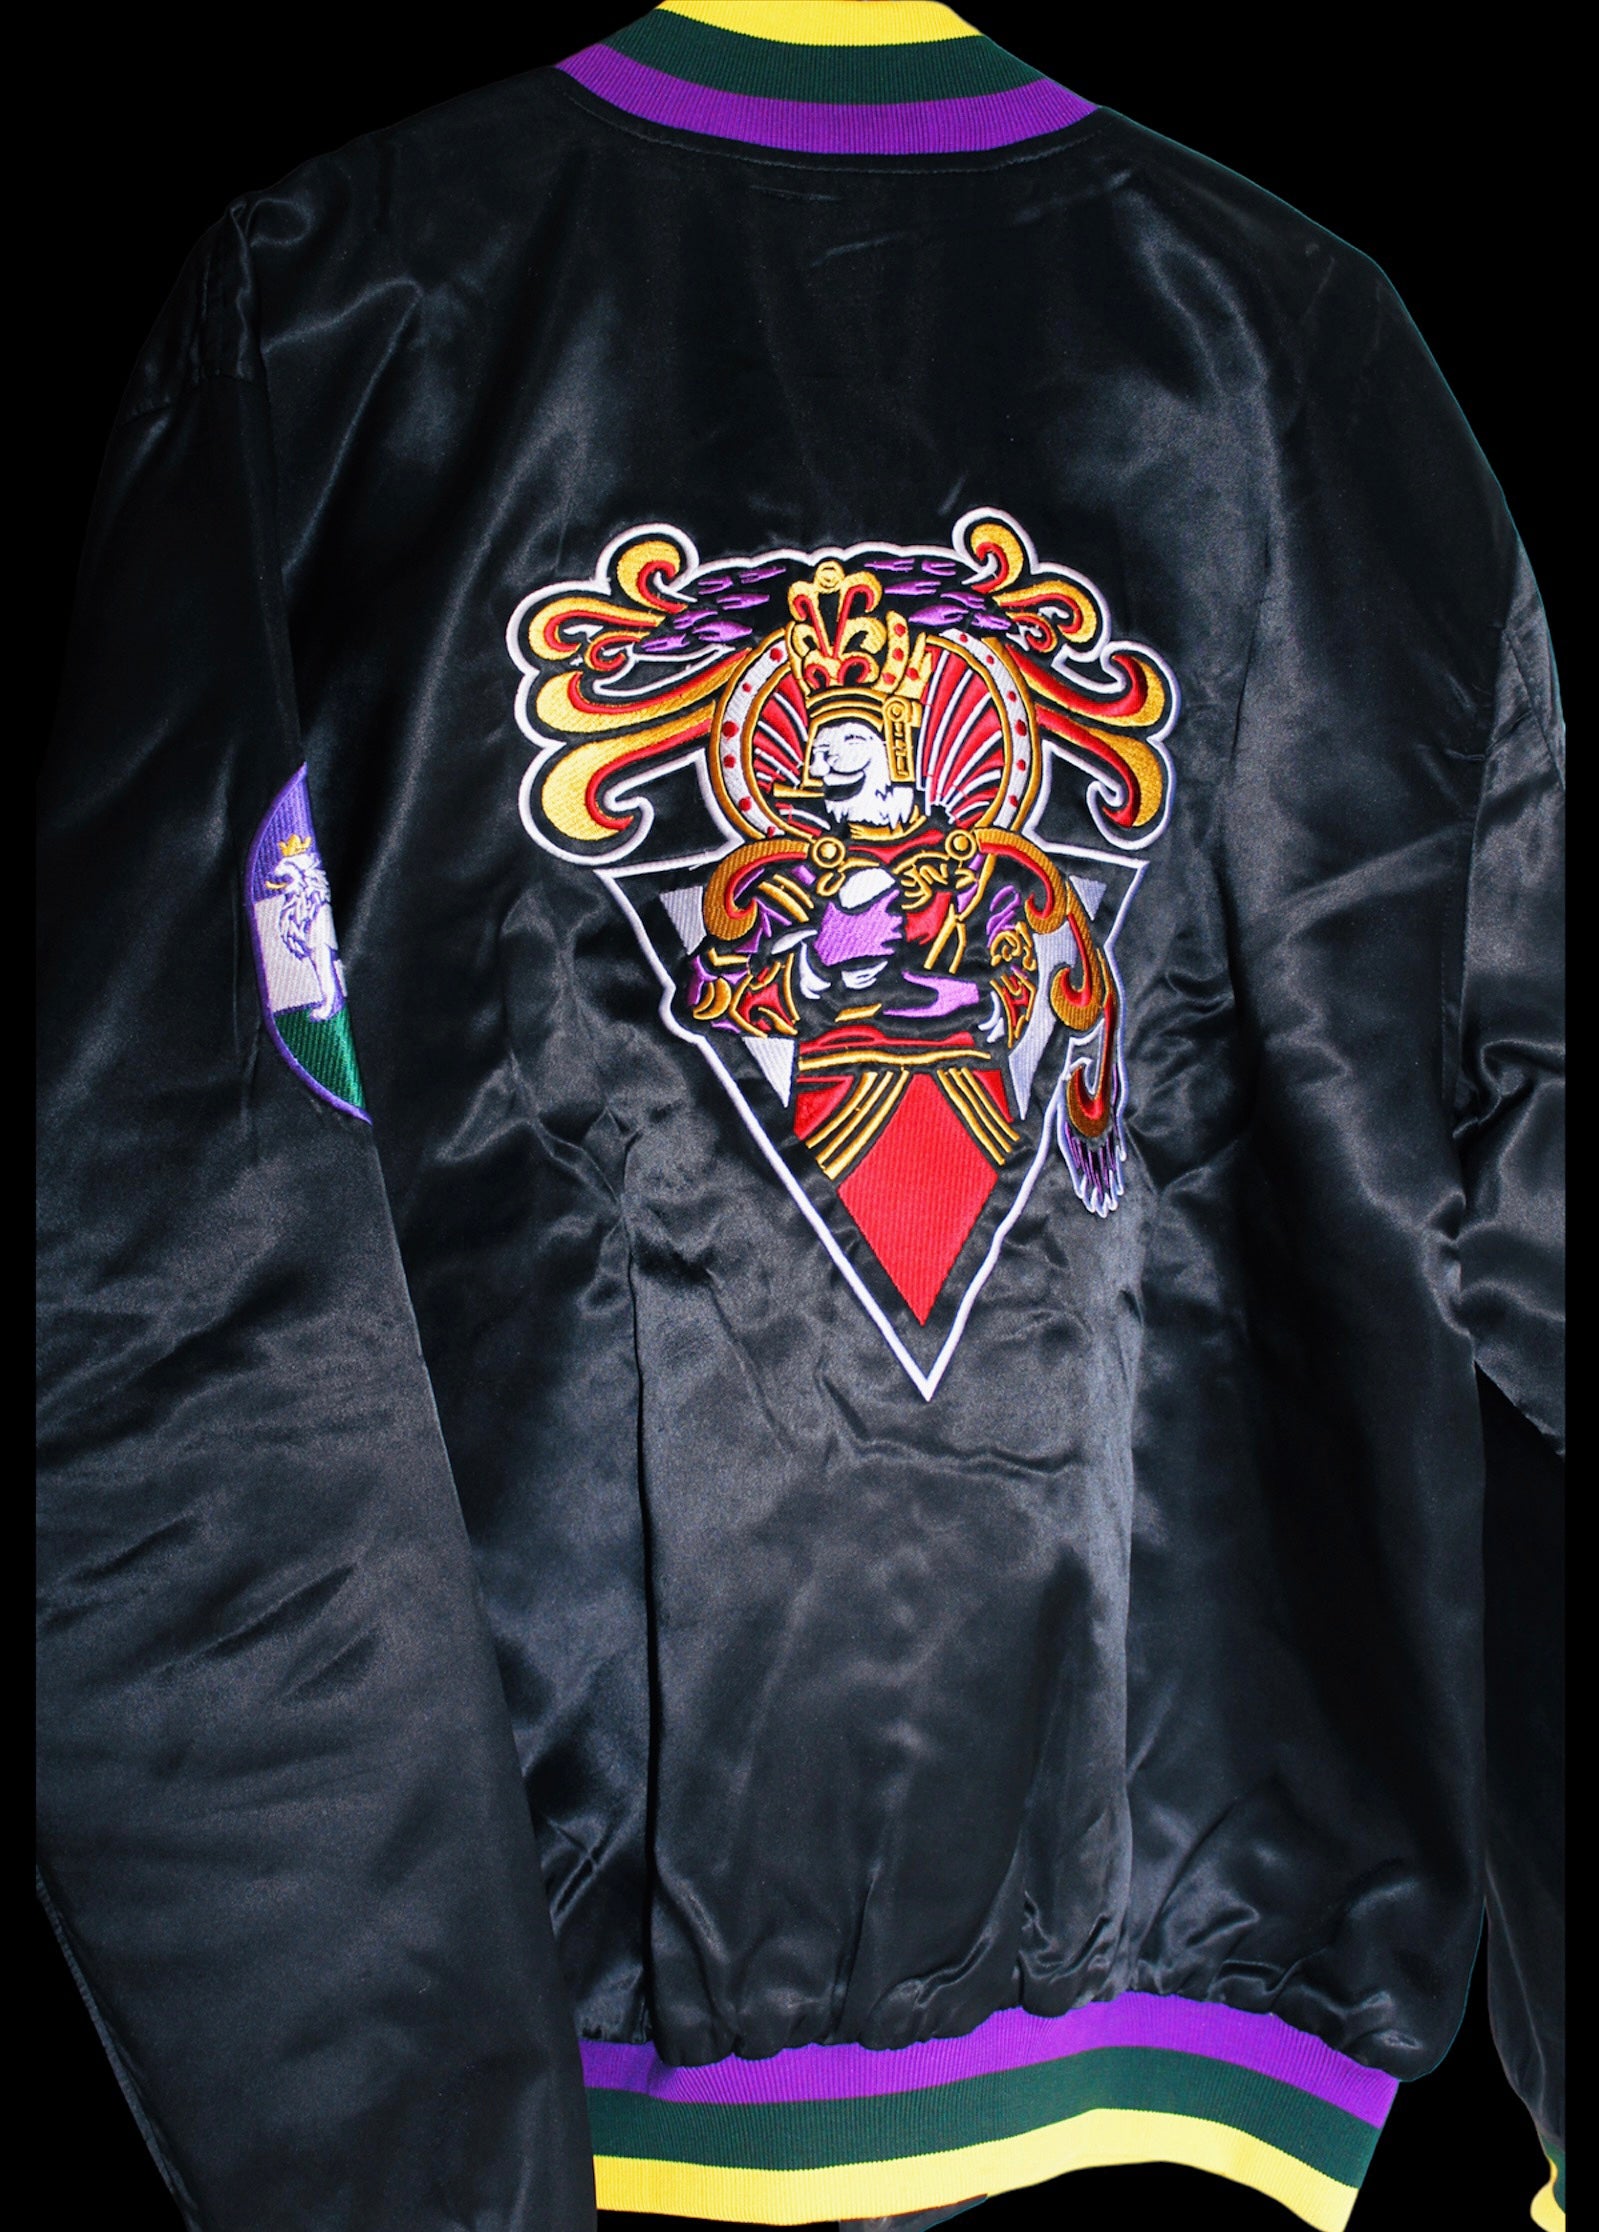 Close-up of the embroidered logo on the Royalty10 Zulu Mardi Gras 23 Satin Bomber Jacket, showcasing intricate details and vibrant colors.